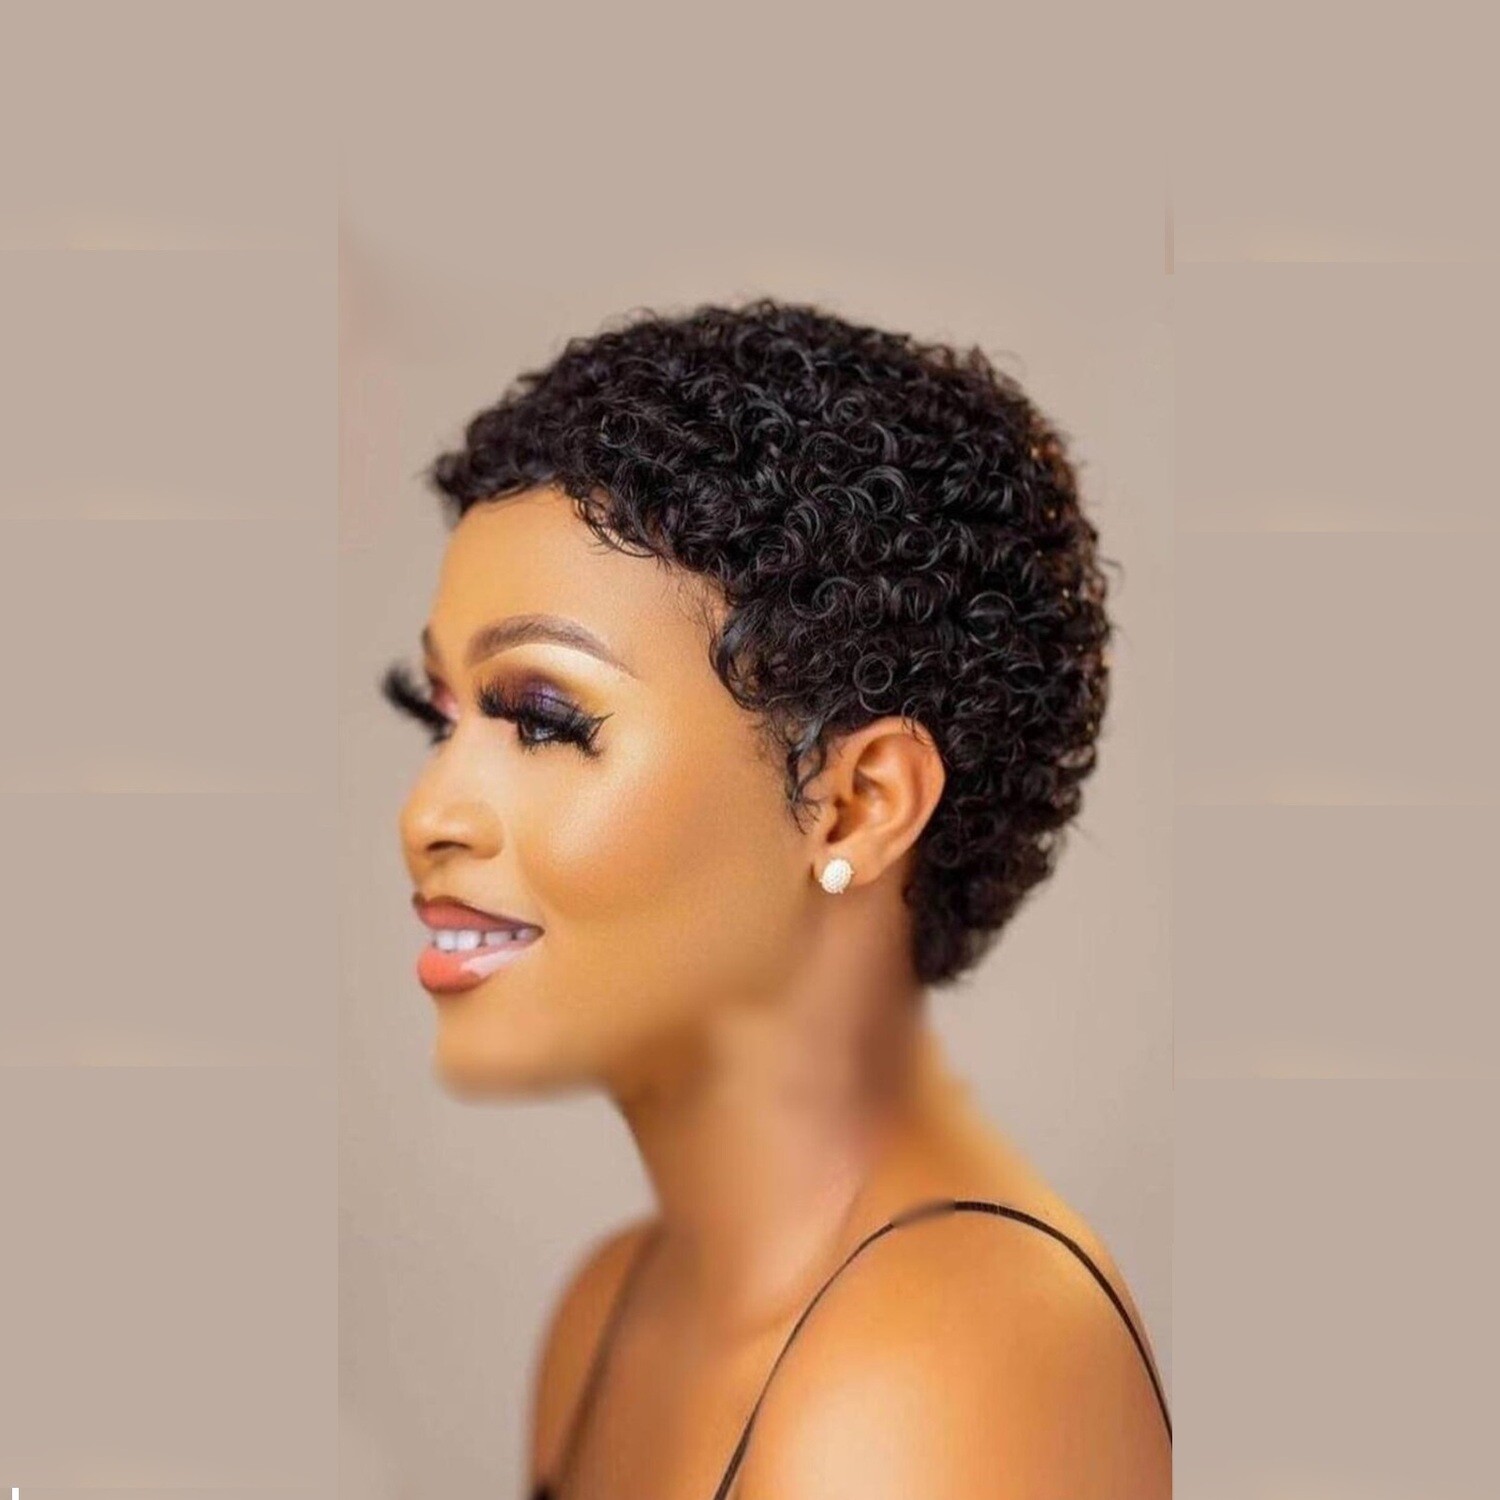 Short Afro Curly Synthetic Hair Wigs for Black Women Short Hairstyles Pixie Cut Wigs with Thin Hair Black Brown Blonde Hair Wigs